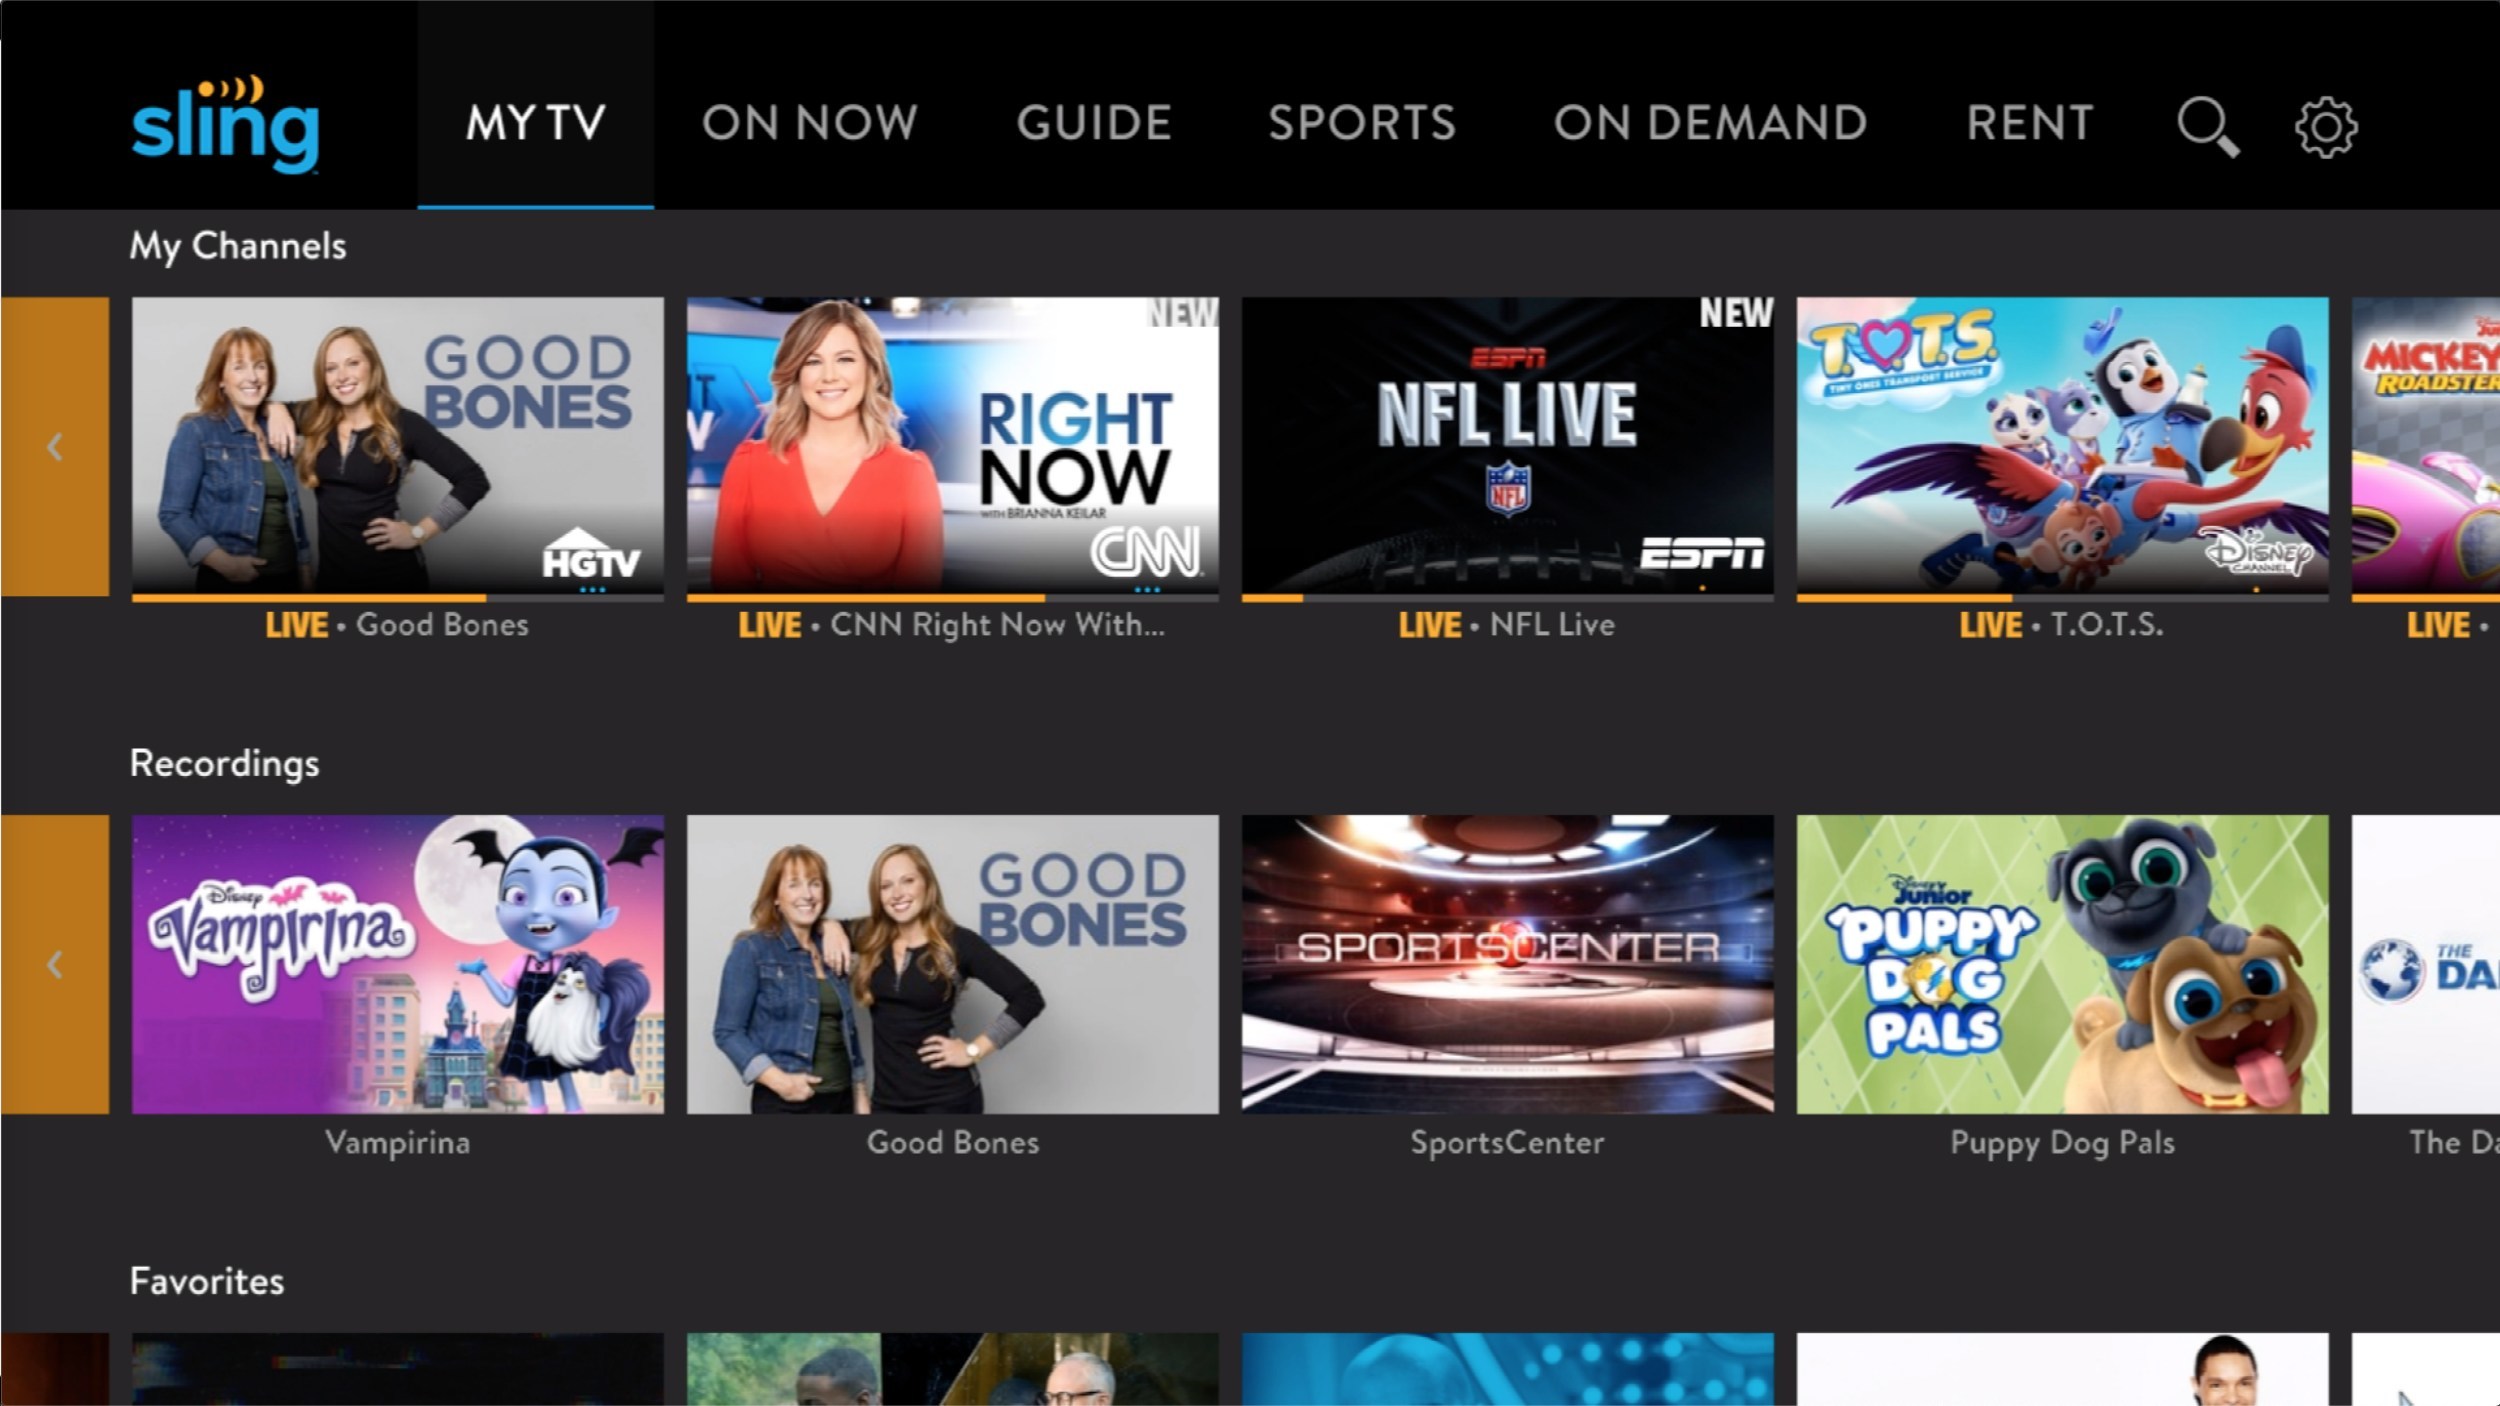 laat staan onderwerp retort Sling TV bolsters live TV with Fox News, MSNBC, CNN's HLN in base service;  launches free cloud DVR, updated pricing, channel lineups - Dec 23, 2019